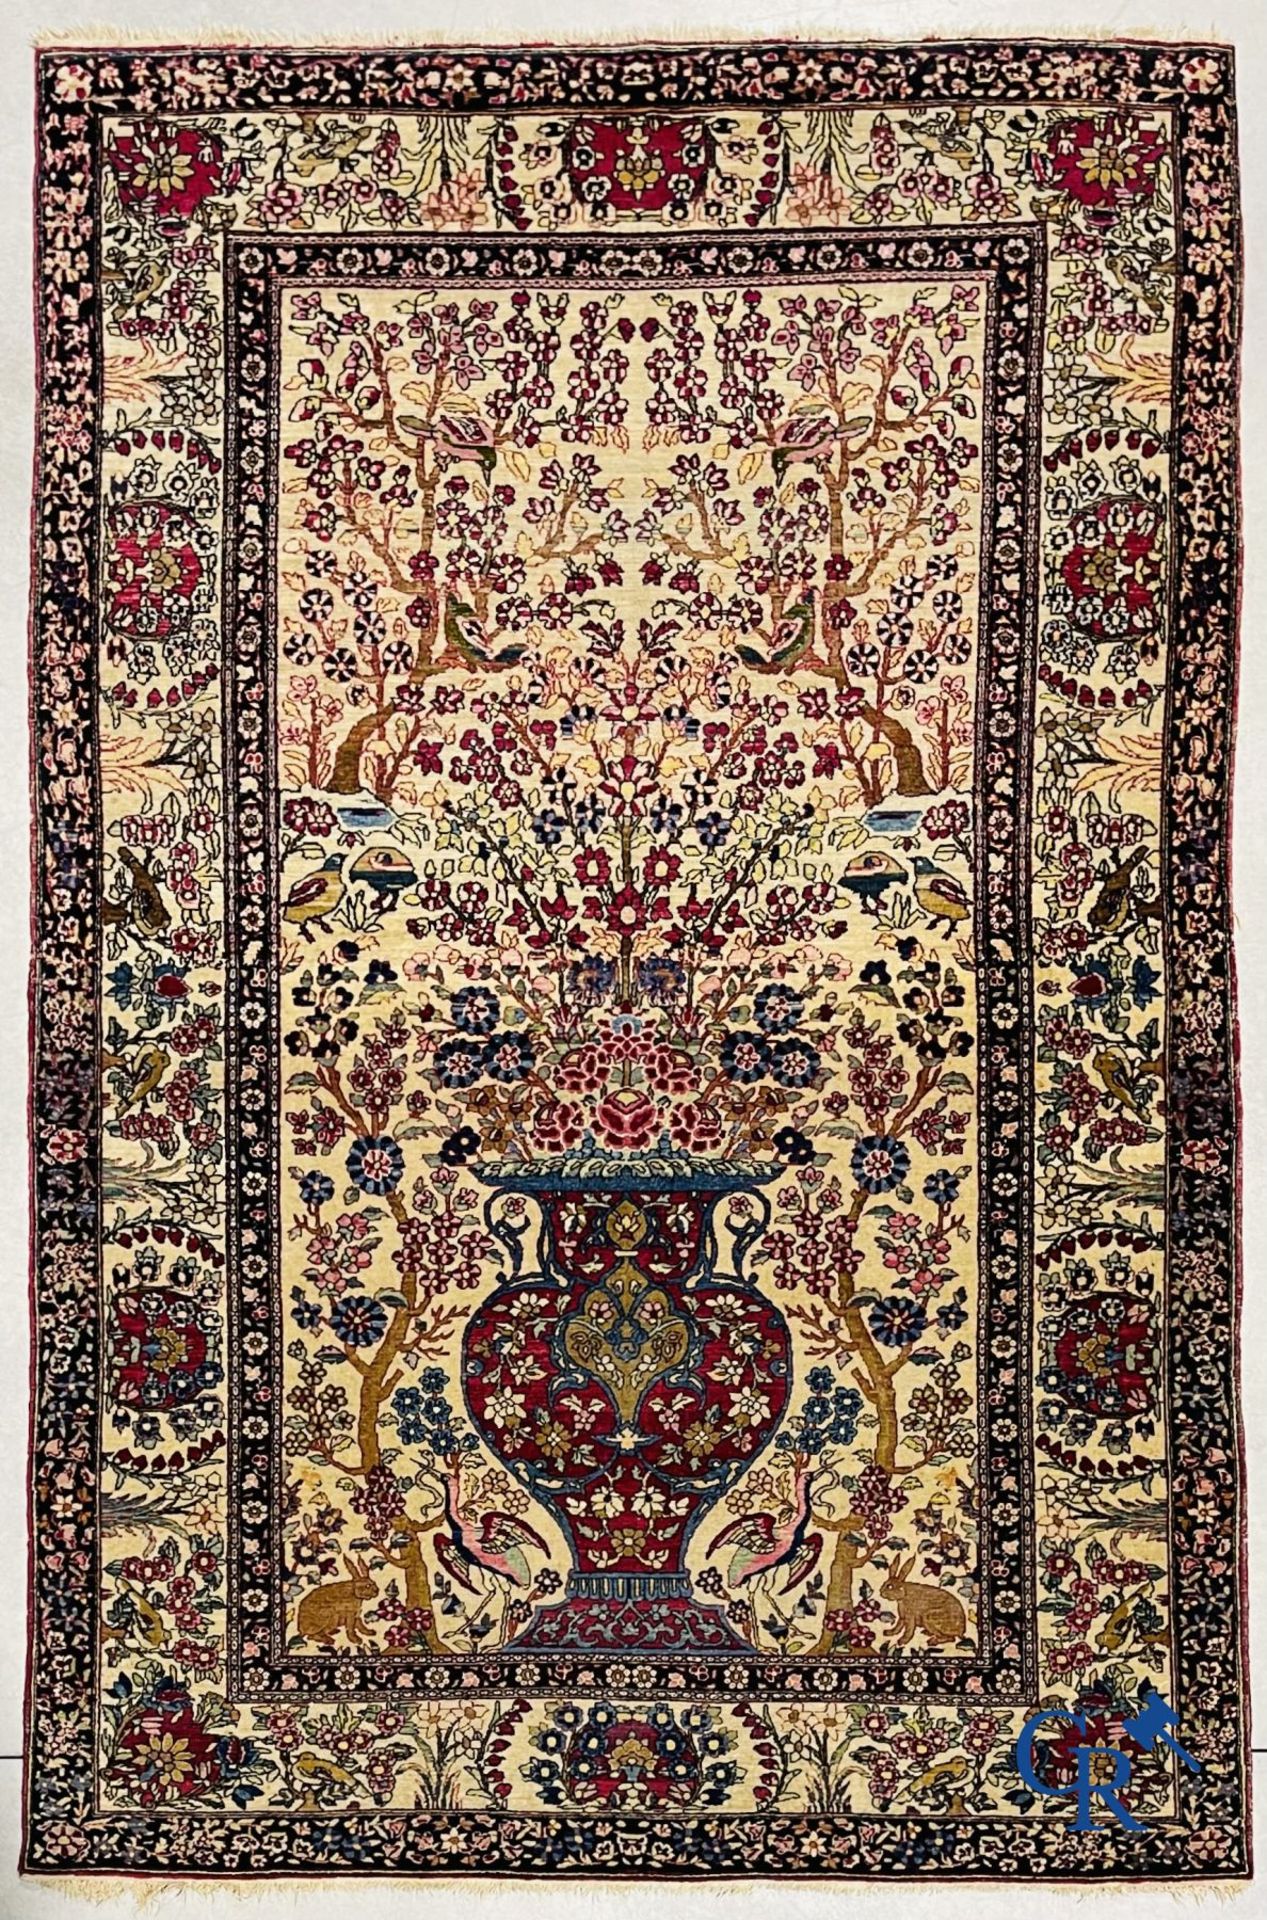 Oriental carpets. Iran. Persian carpet with a flower vase, birds and rabbits in a floral decor. - Image 2 of 10